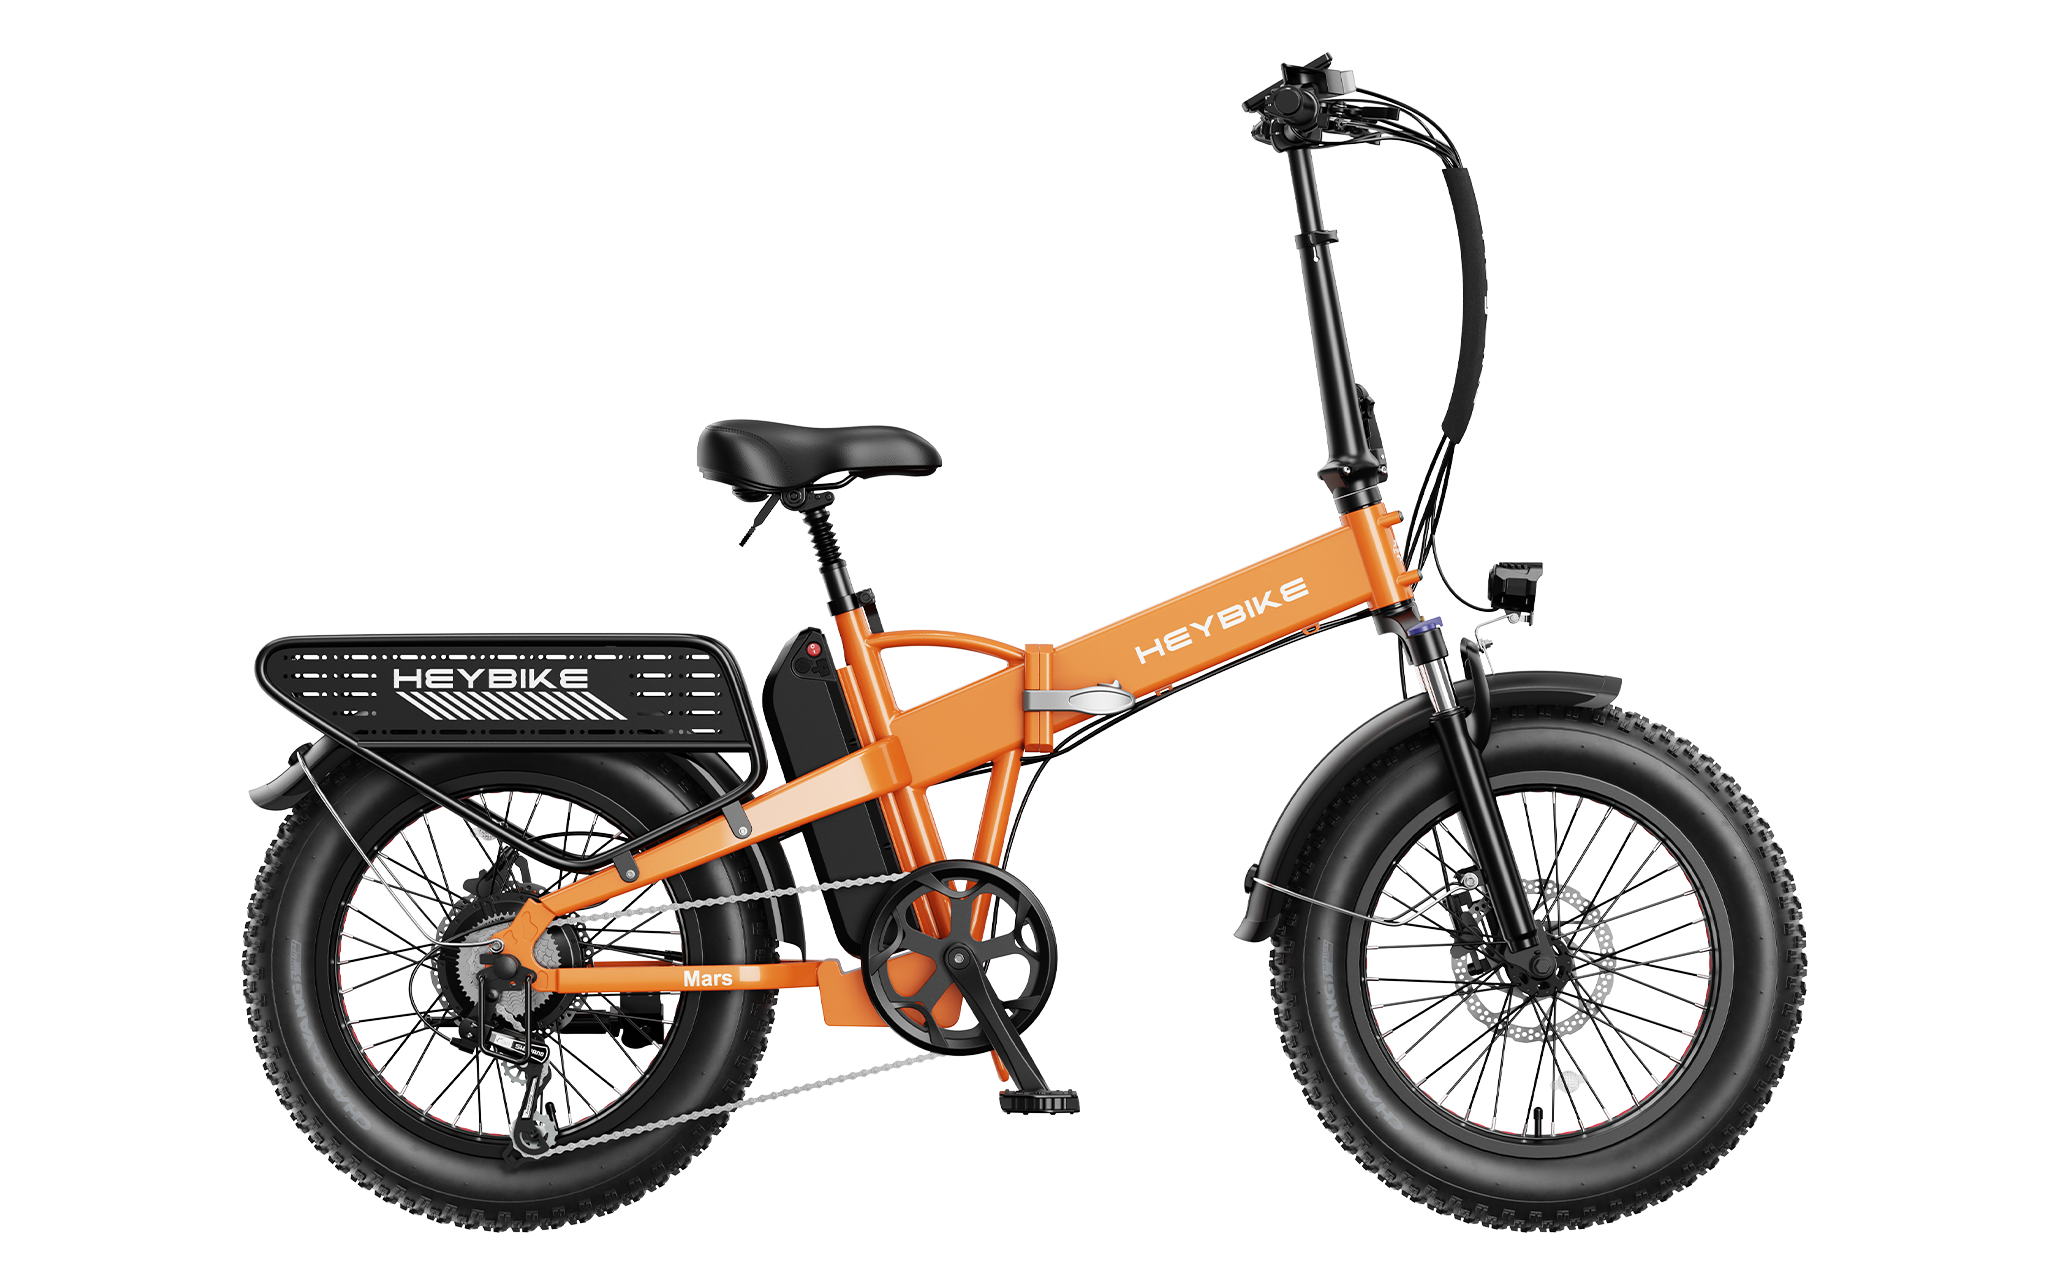 Best Electric Bikes for Adults| Heybike Ebikes for Sale